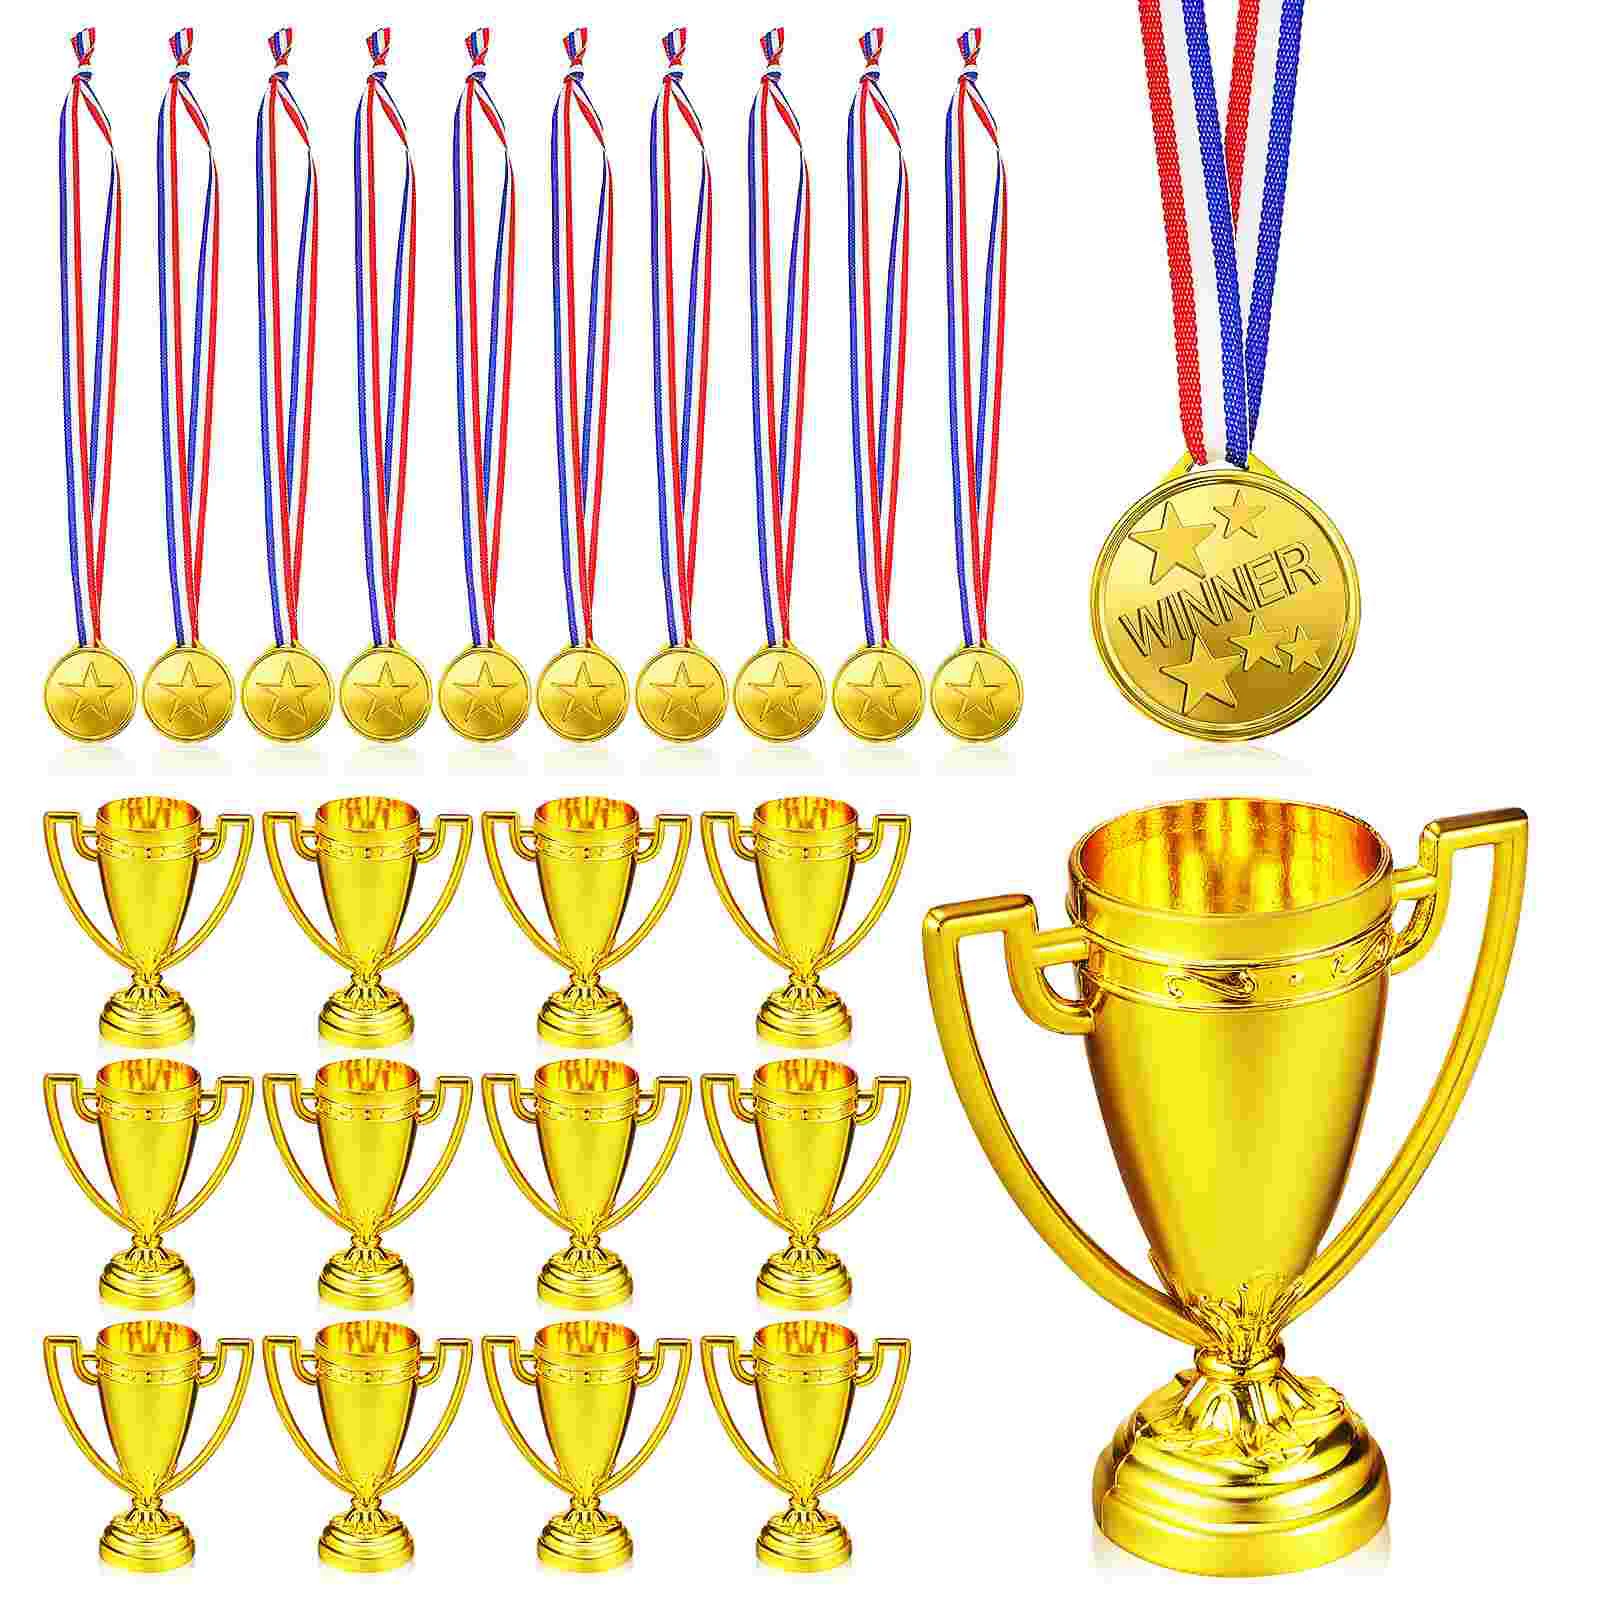 

18 Pcs Plastic Trophy with 18 Pcs Medals Prizes for Kids Sports Day Prizes Gymnastics Competitions Party Favor